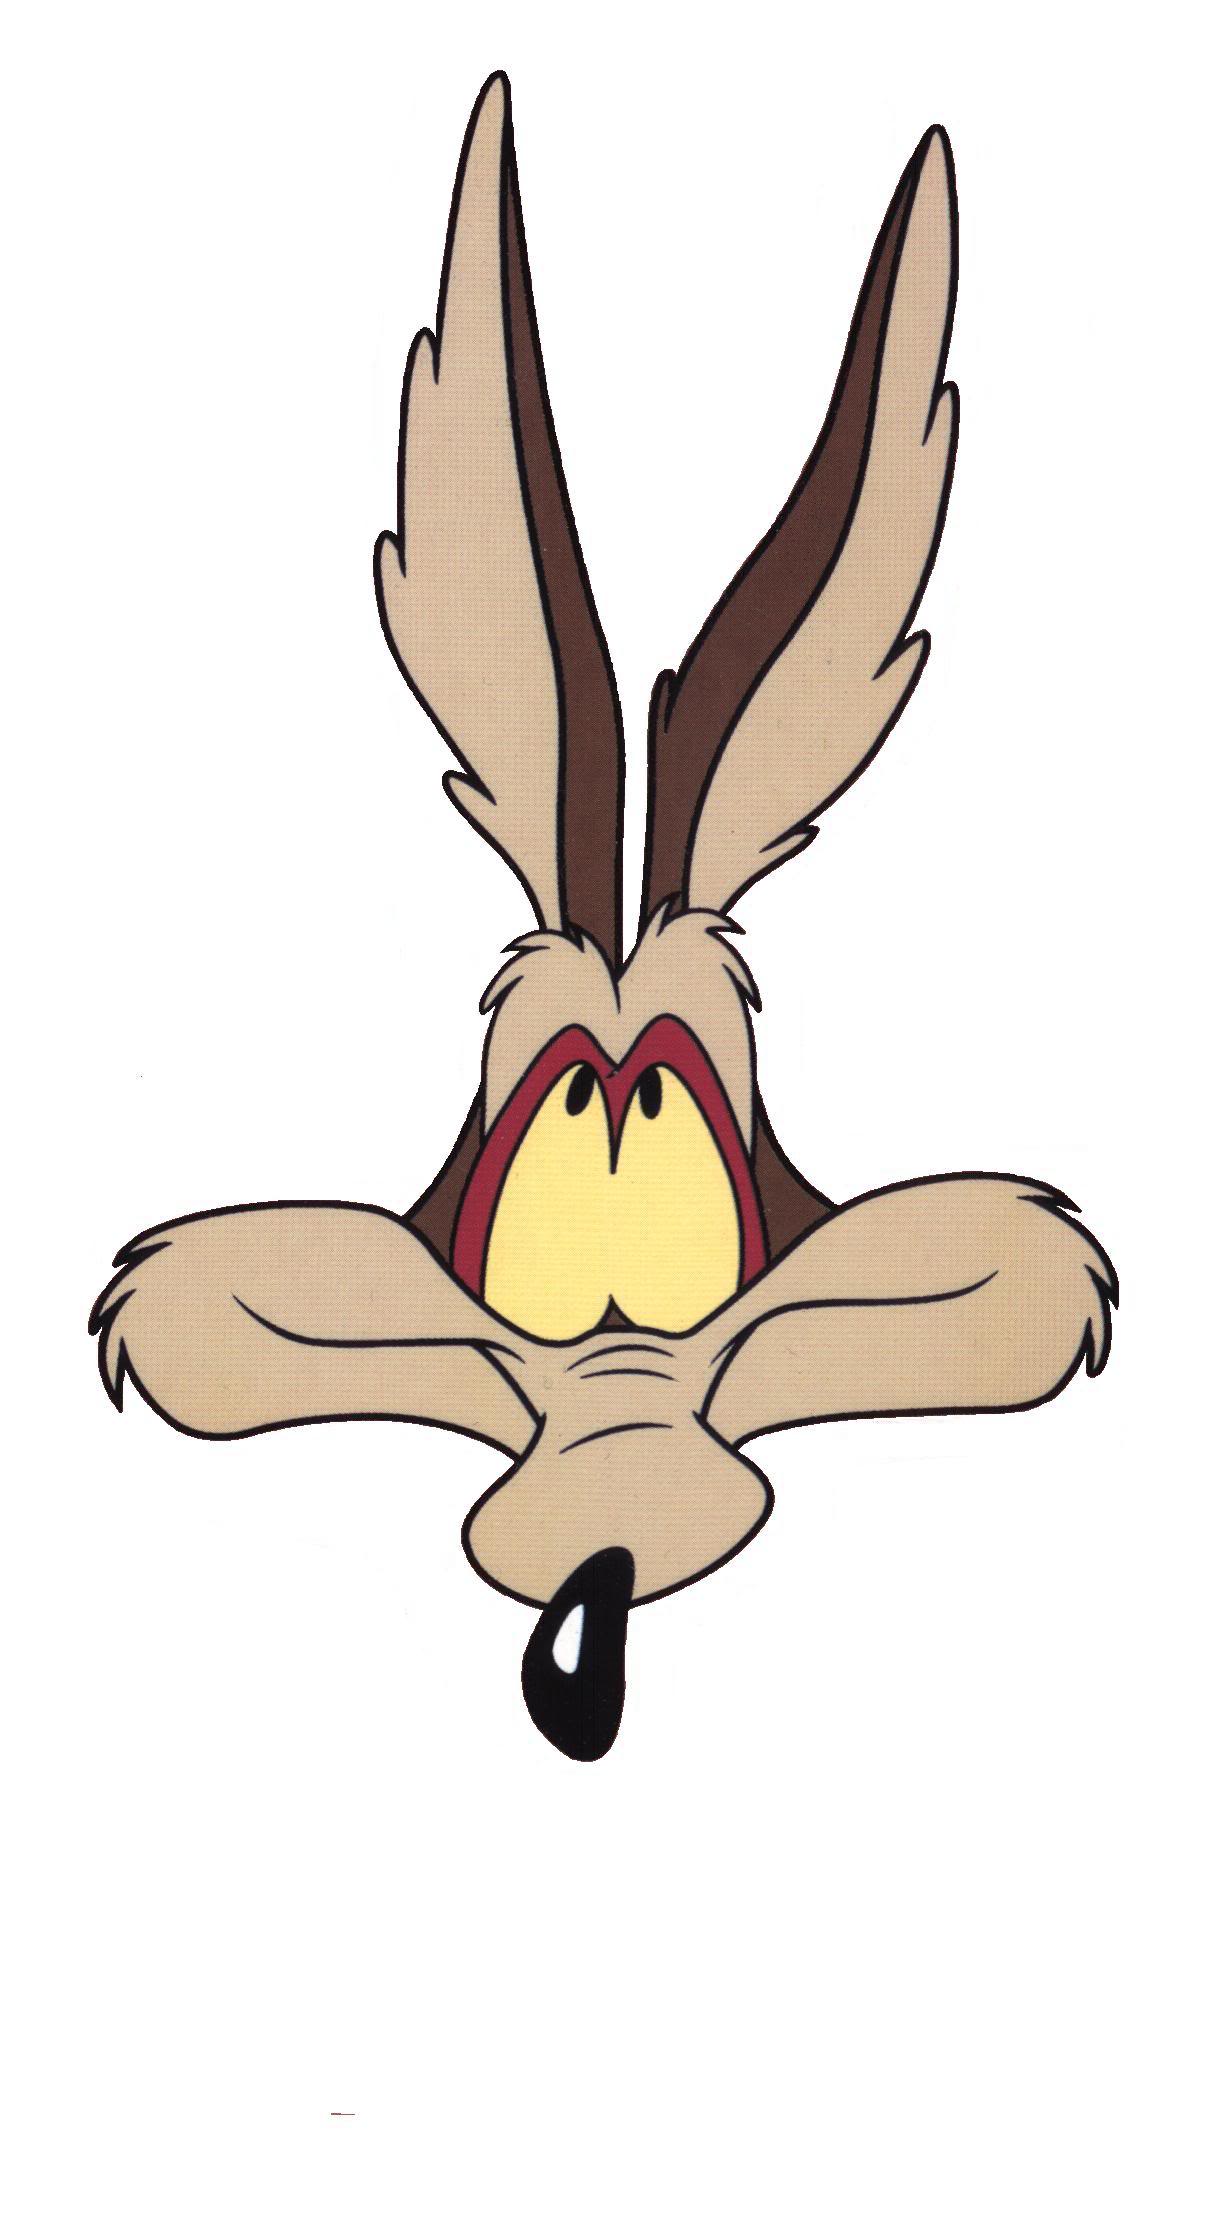 Wile E Coyote For President An Exercise In Narcissism